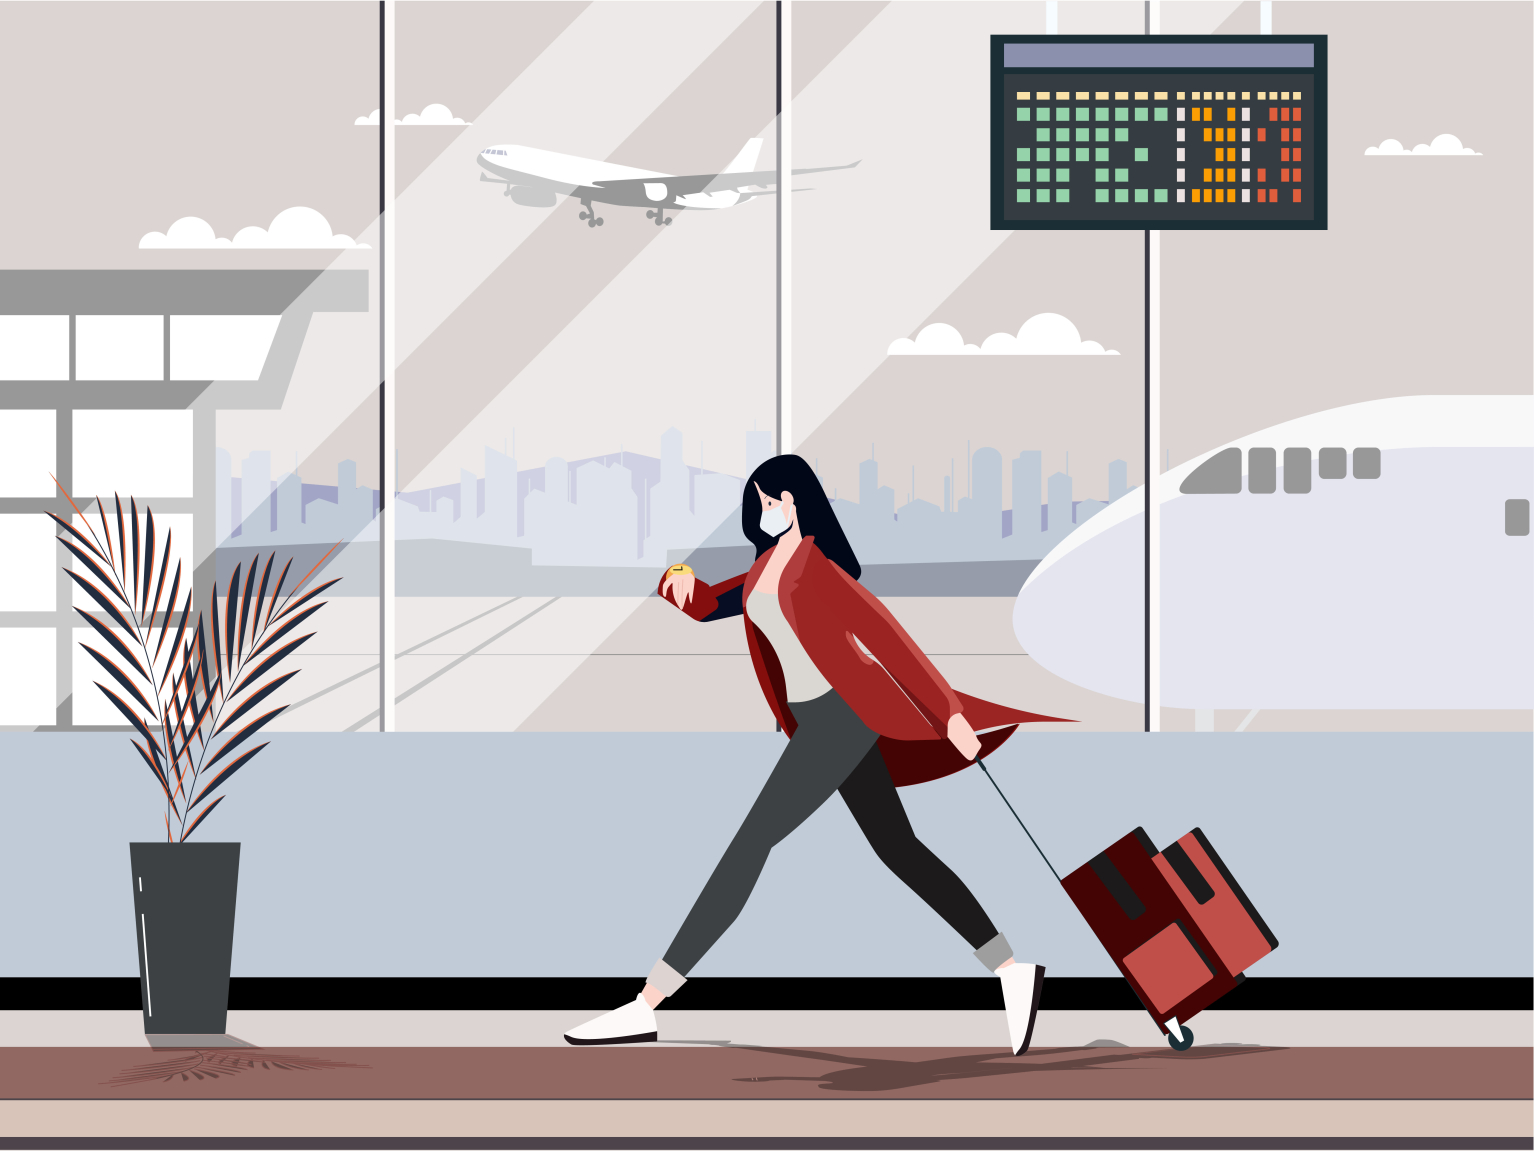 airport illustration by Mahes Excel Aldianzyah on Dribbble